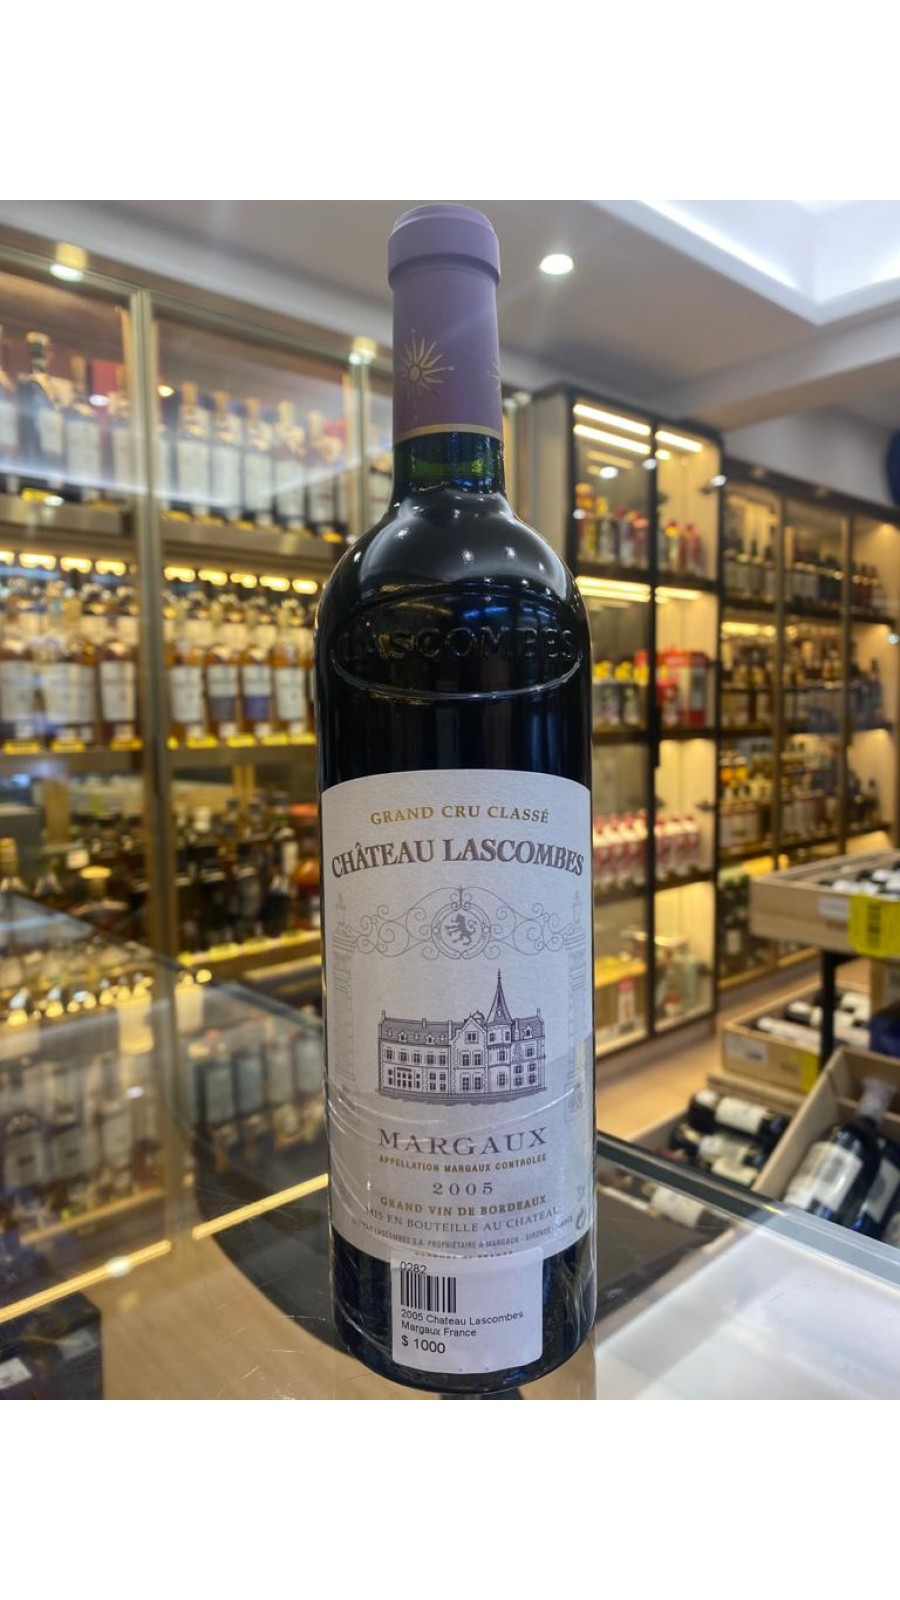 Chateau Lascombes Margaux 2005